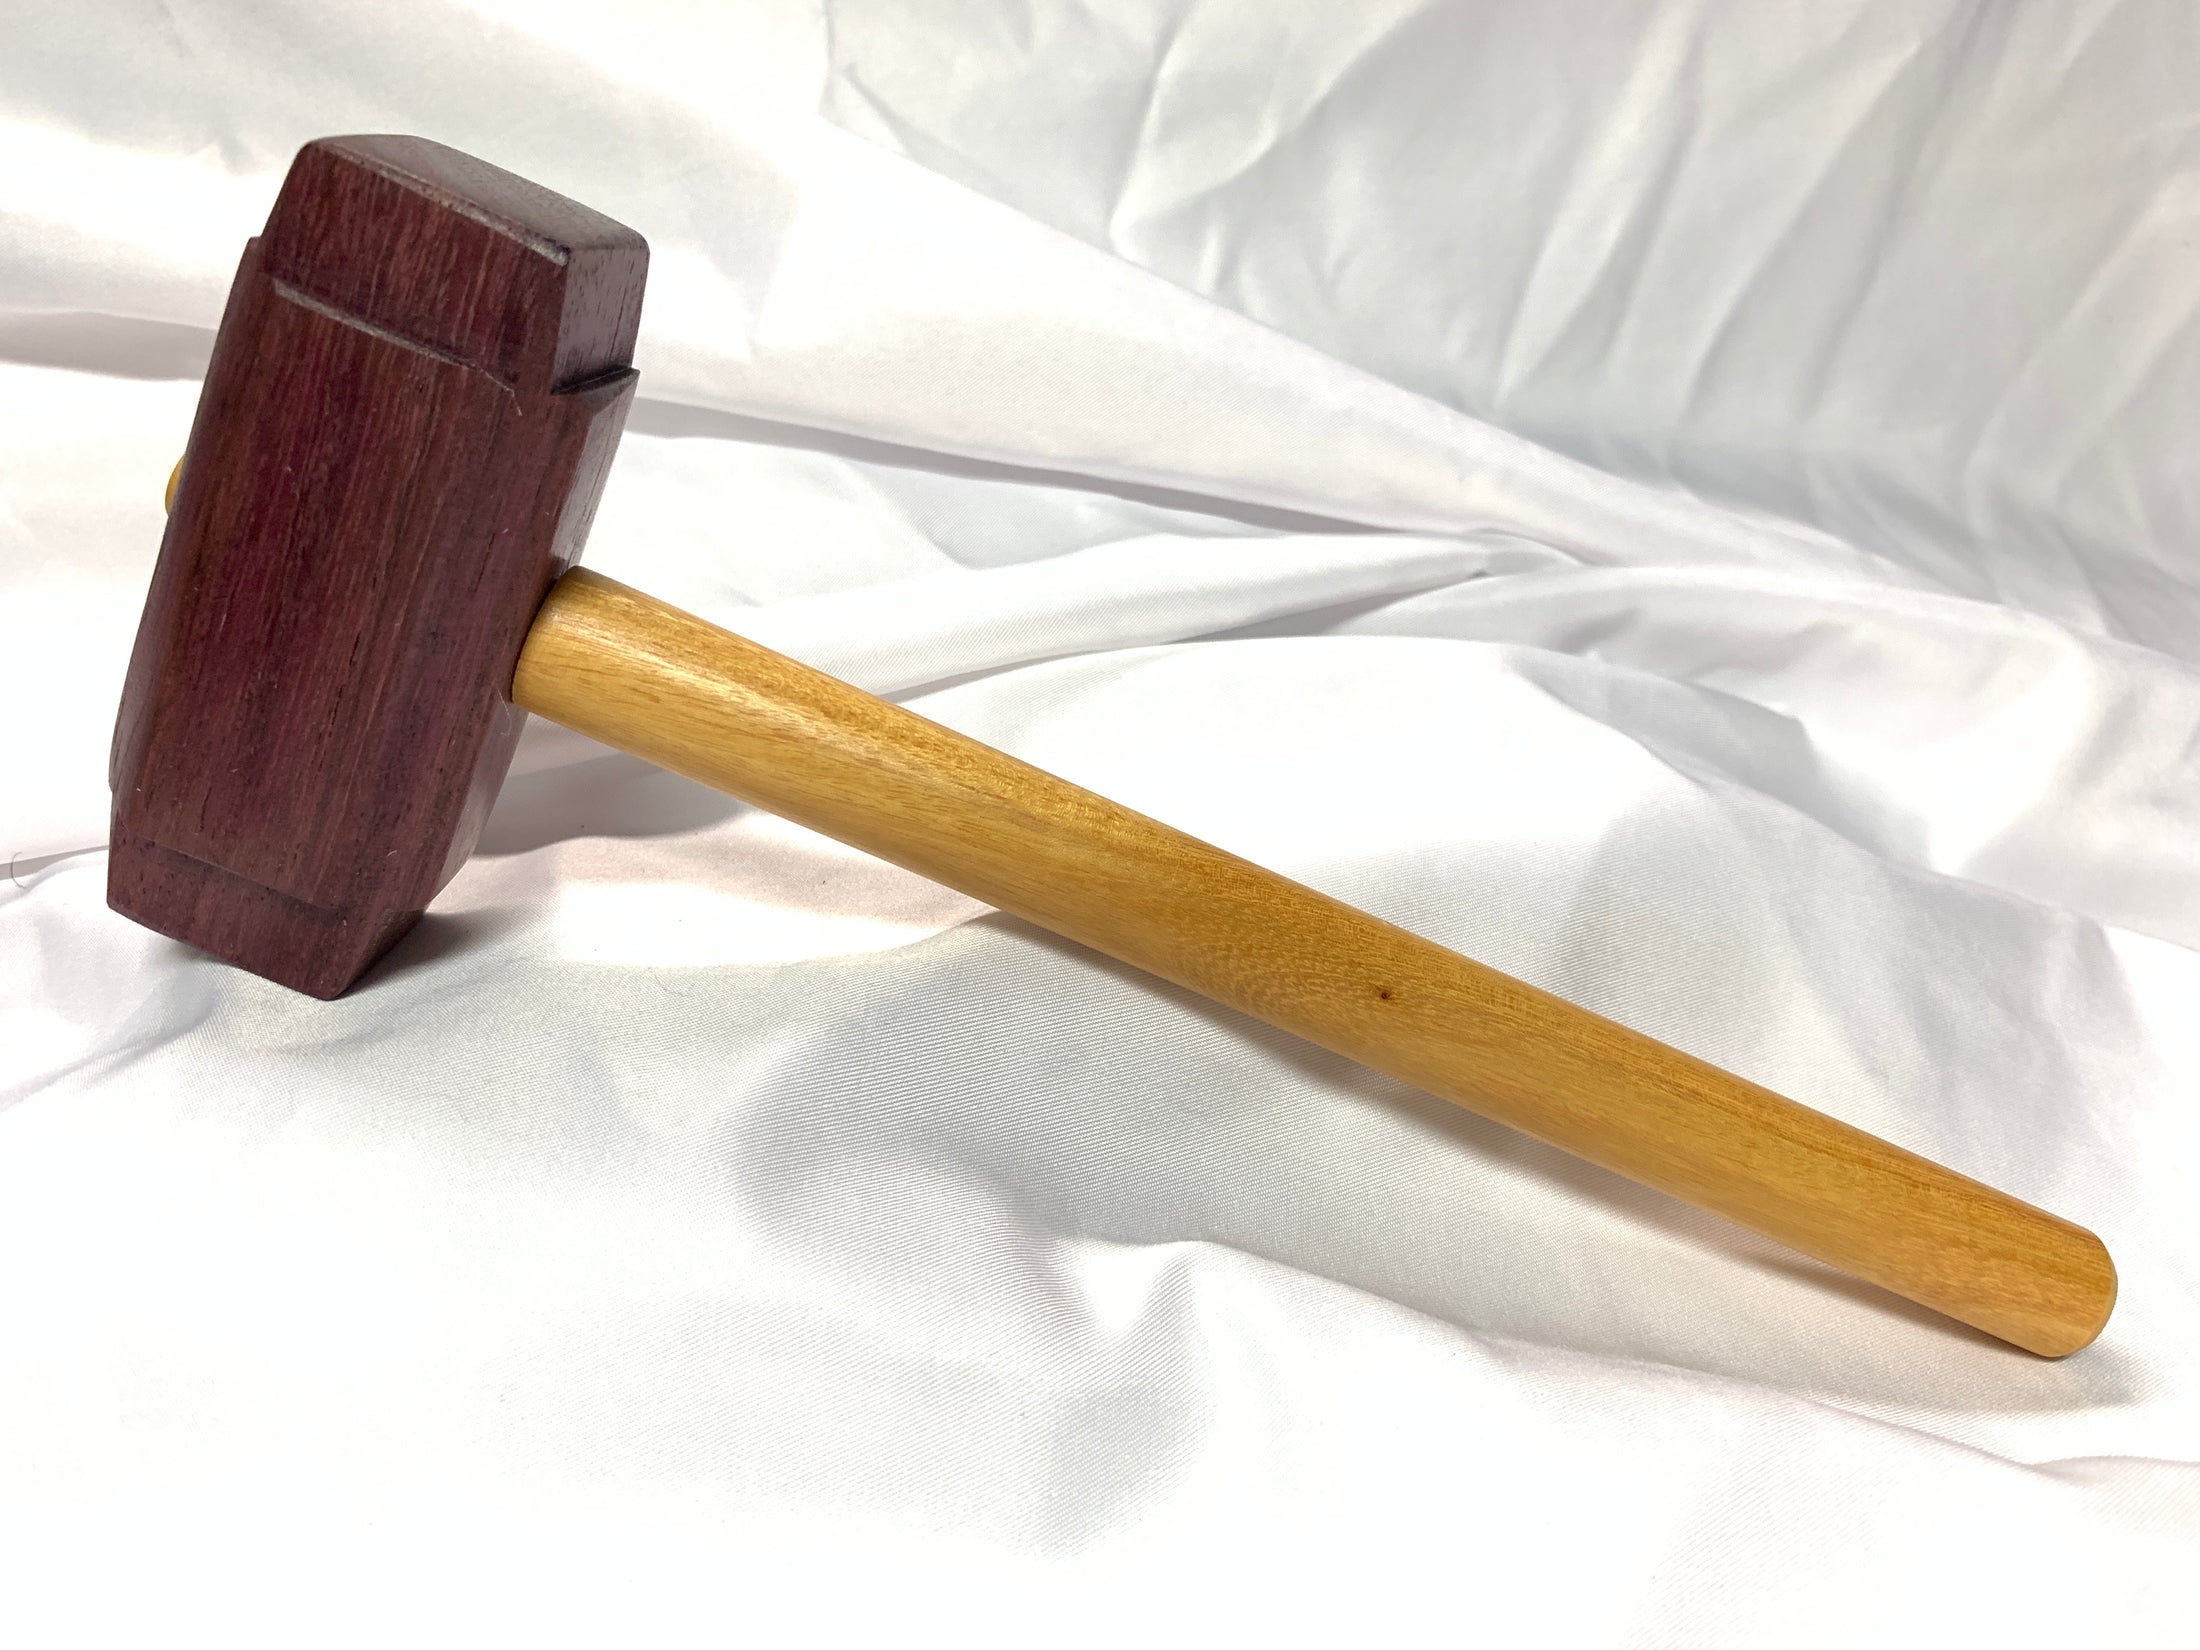 Thors Hammer Woodworking Mallet Purpleheart Head with Osage Orange Handle Kings Fine Woodworking